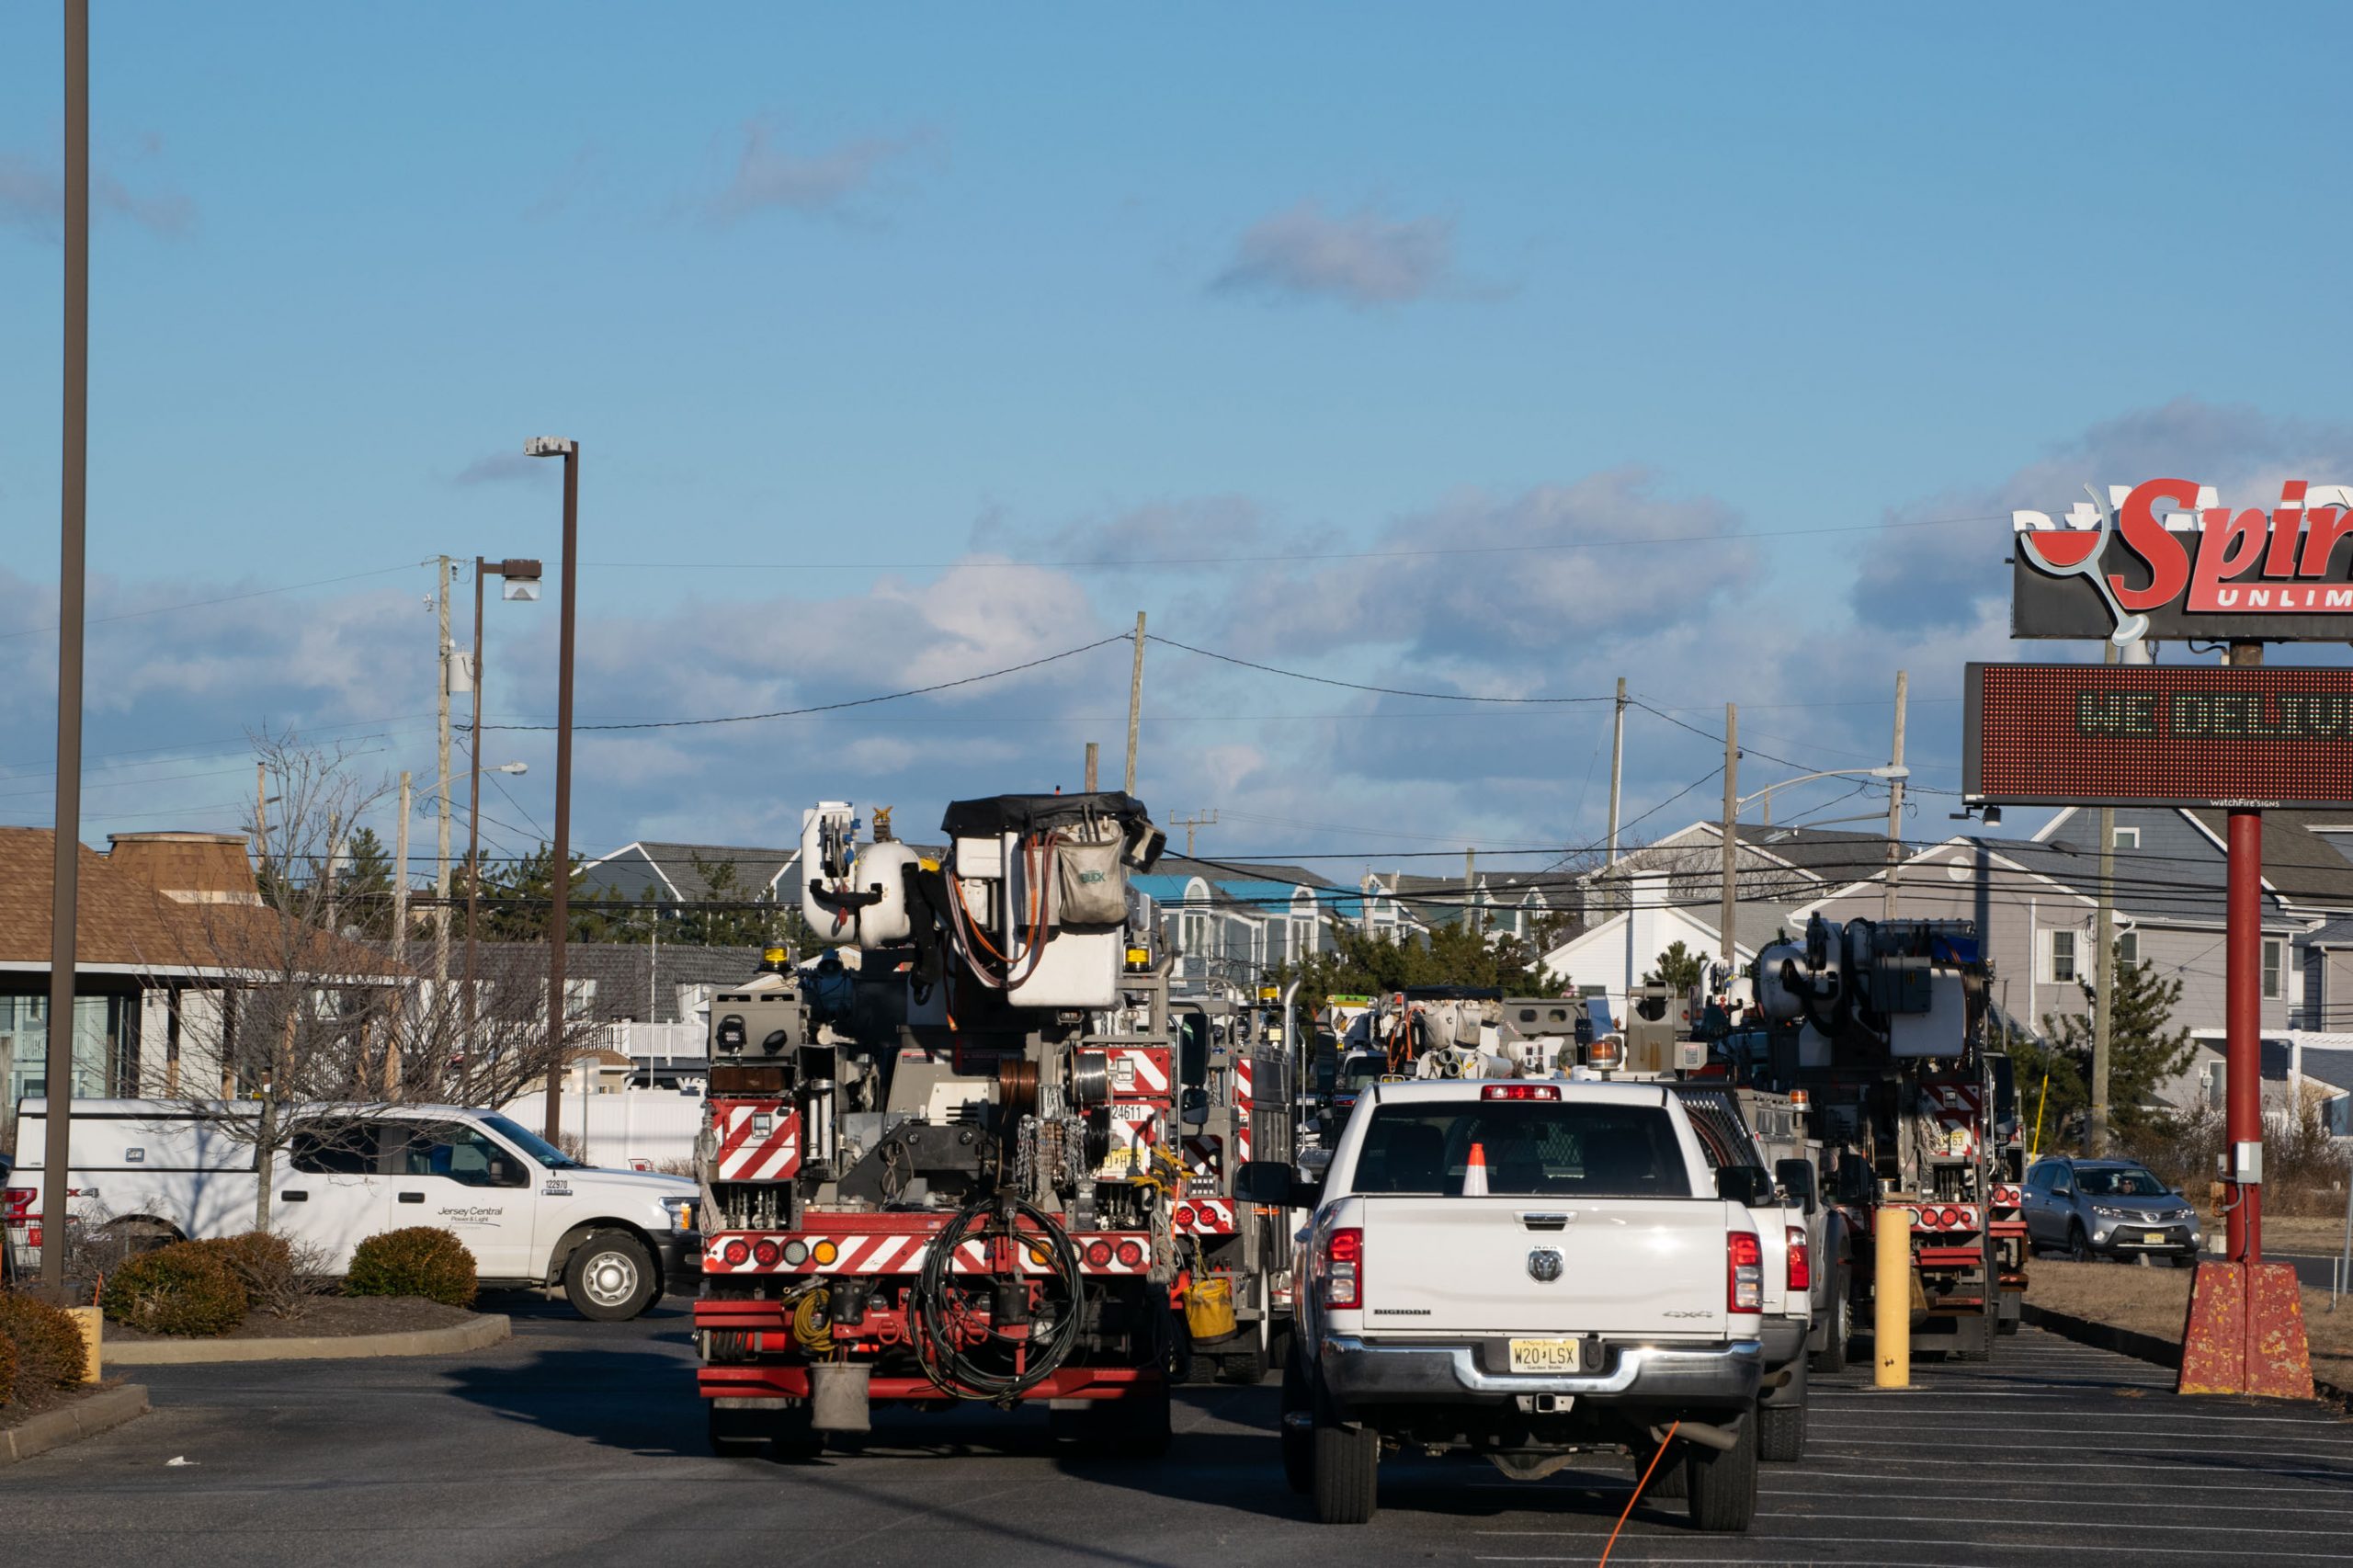 A JCP&L truck near the scene of a power outage in Ortley Beach, Jan. 29, 2021. (Photo: Daniel Nee)